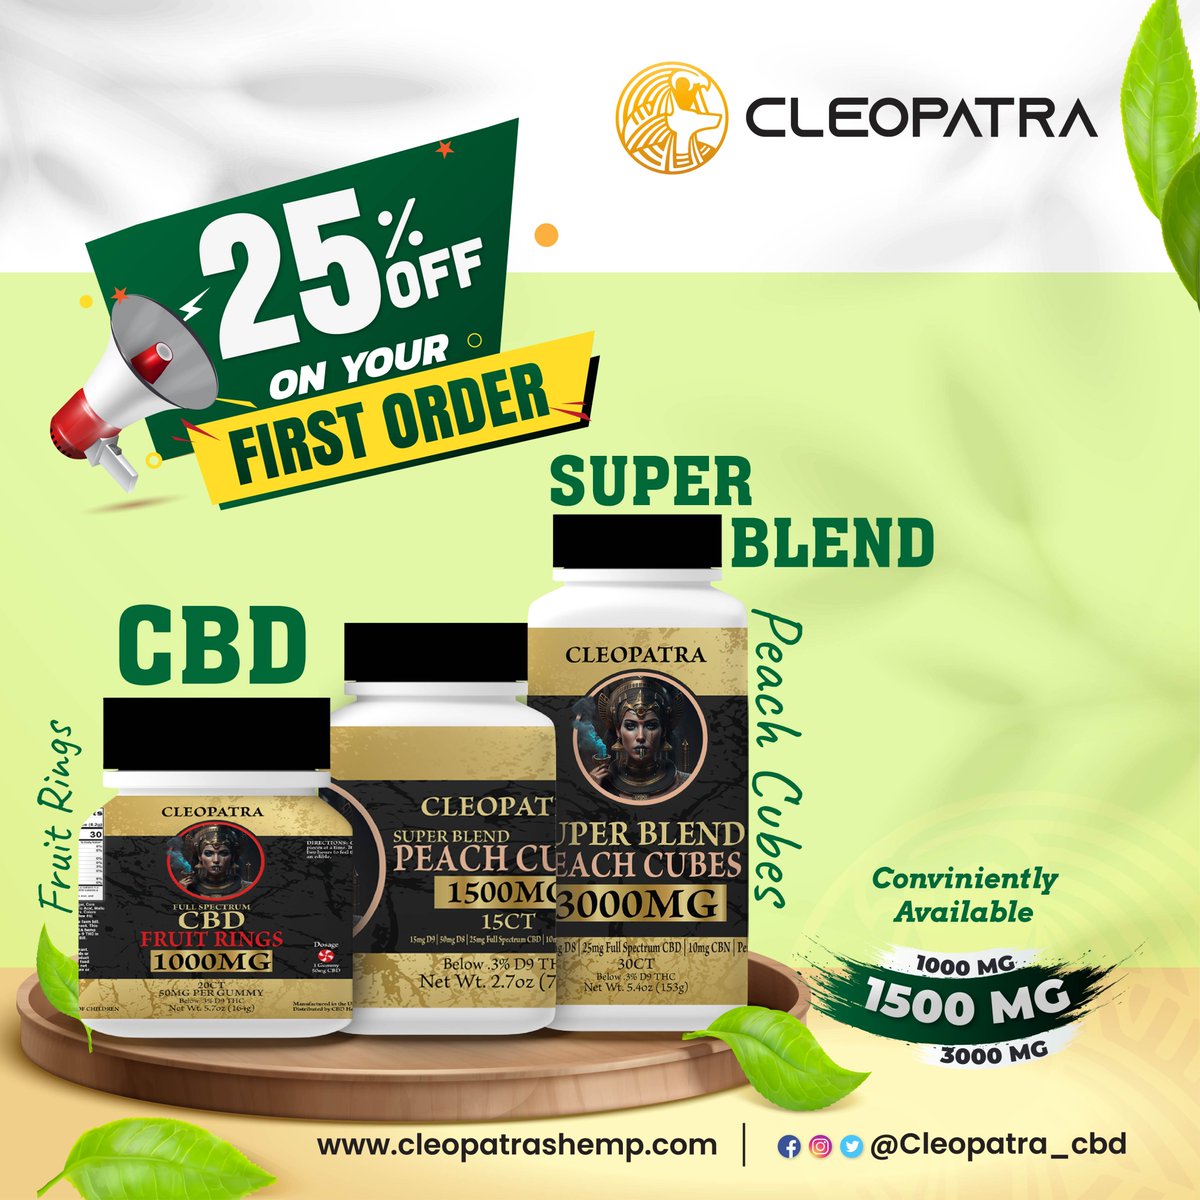 'Experience the goodness of Cleopatra CBD Super Blend Peach Cubes at an exclusive 25% discount on your first purchase! 🍑🌱 #cbdgummies 
#CBDPeachCubes #PeachCBDBlend #CBDWellness #CBD25Off #PeachyCBD #CBDGummies #CBDRelaxation #CBDDiscount
#SuperBlendCubes #CBDHealth